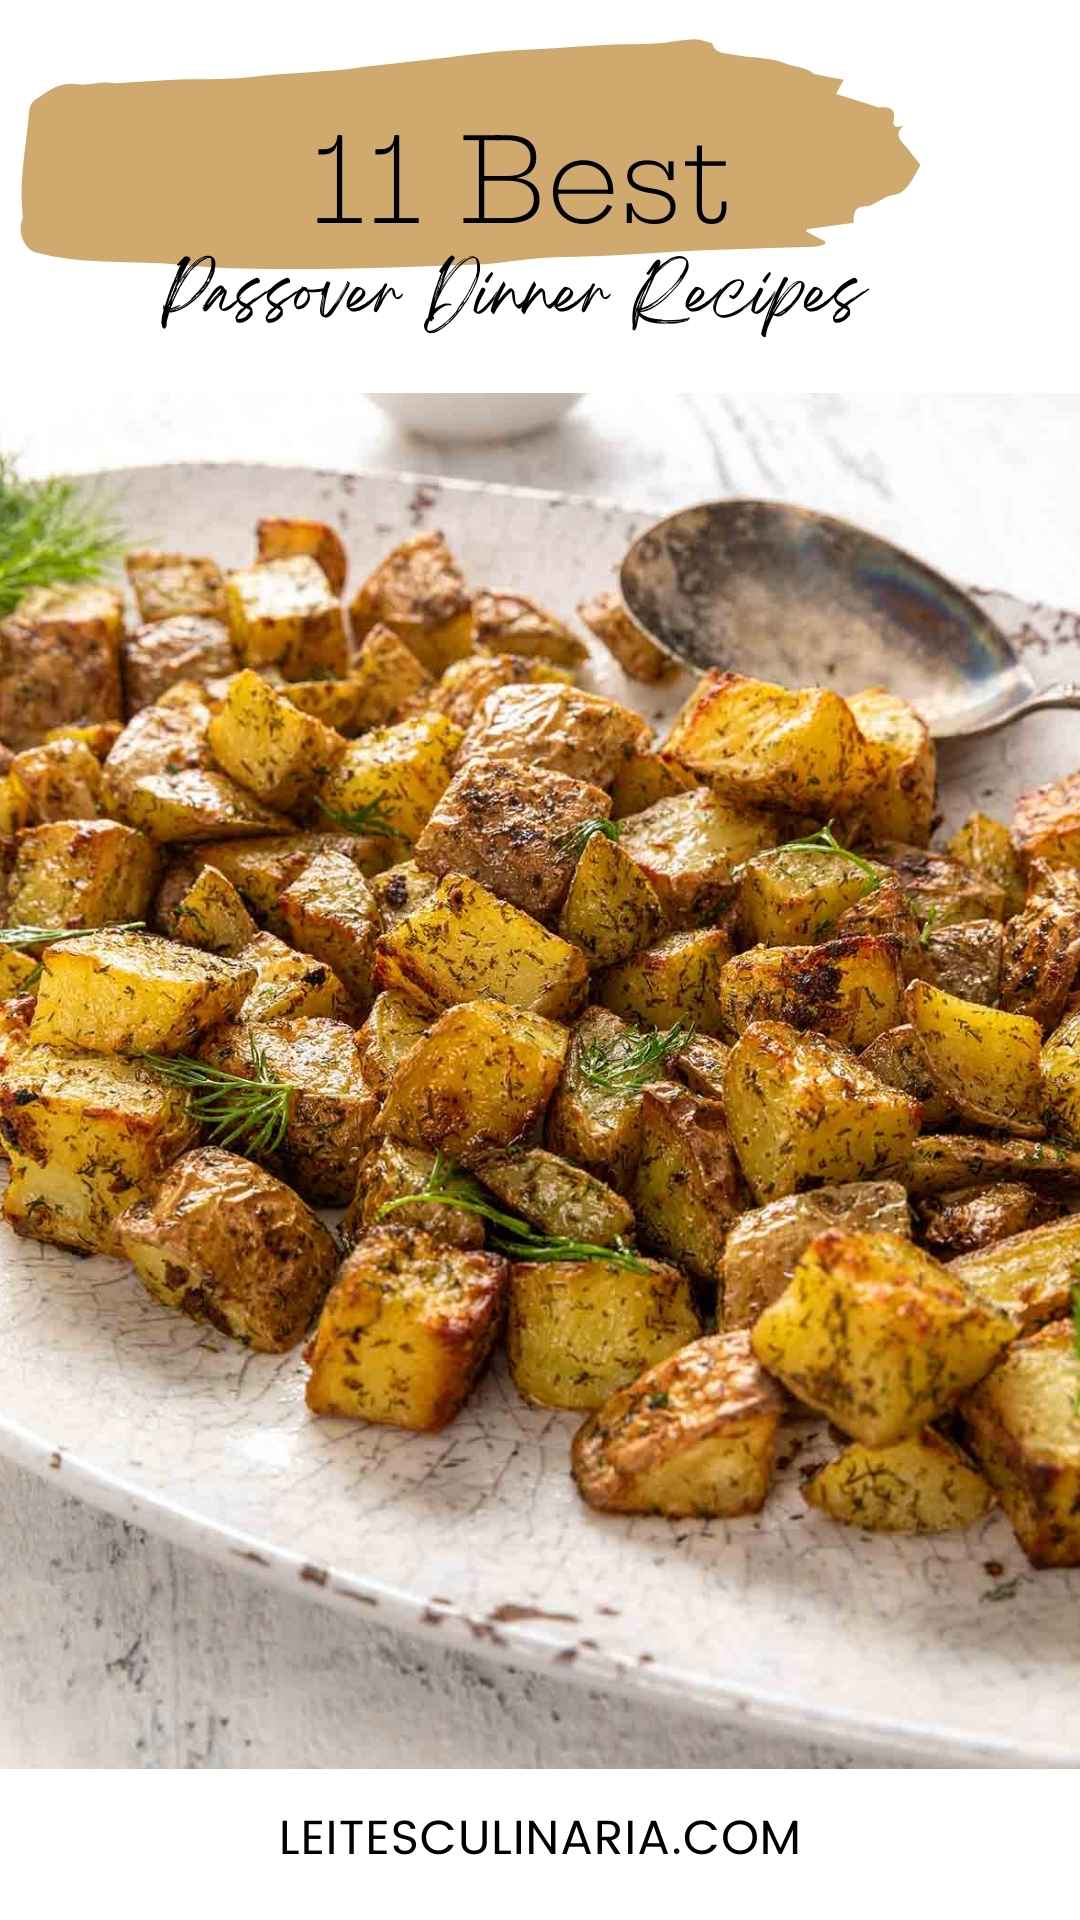 A platter of roasted potatoes garnished with dill.